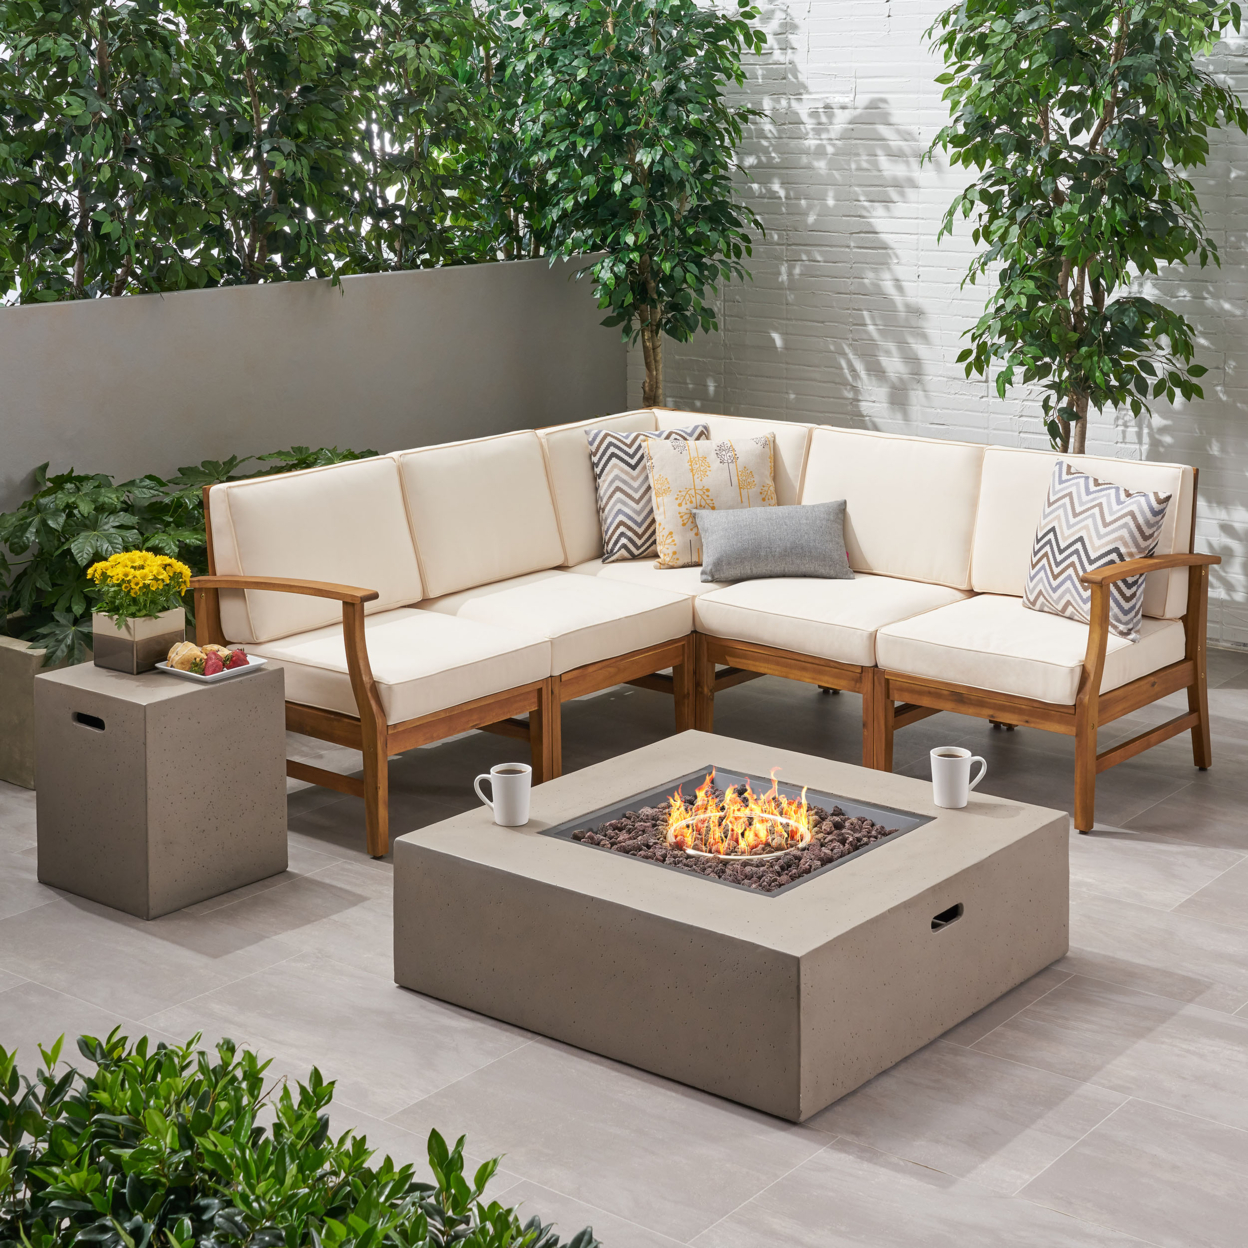 Janice Outdoor 6 Seater Acacia Wood Sofa Set With Square Fire Table And Tank - Teak + Creme + Light Gray